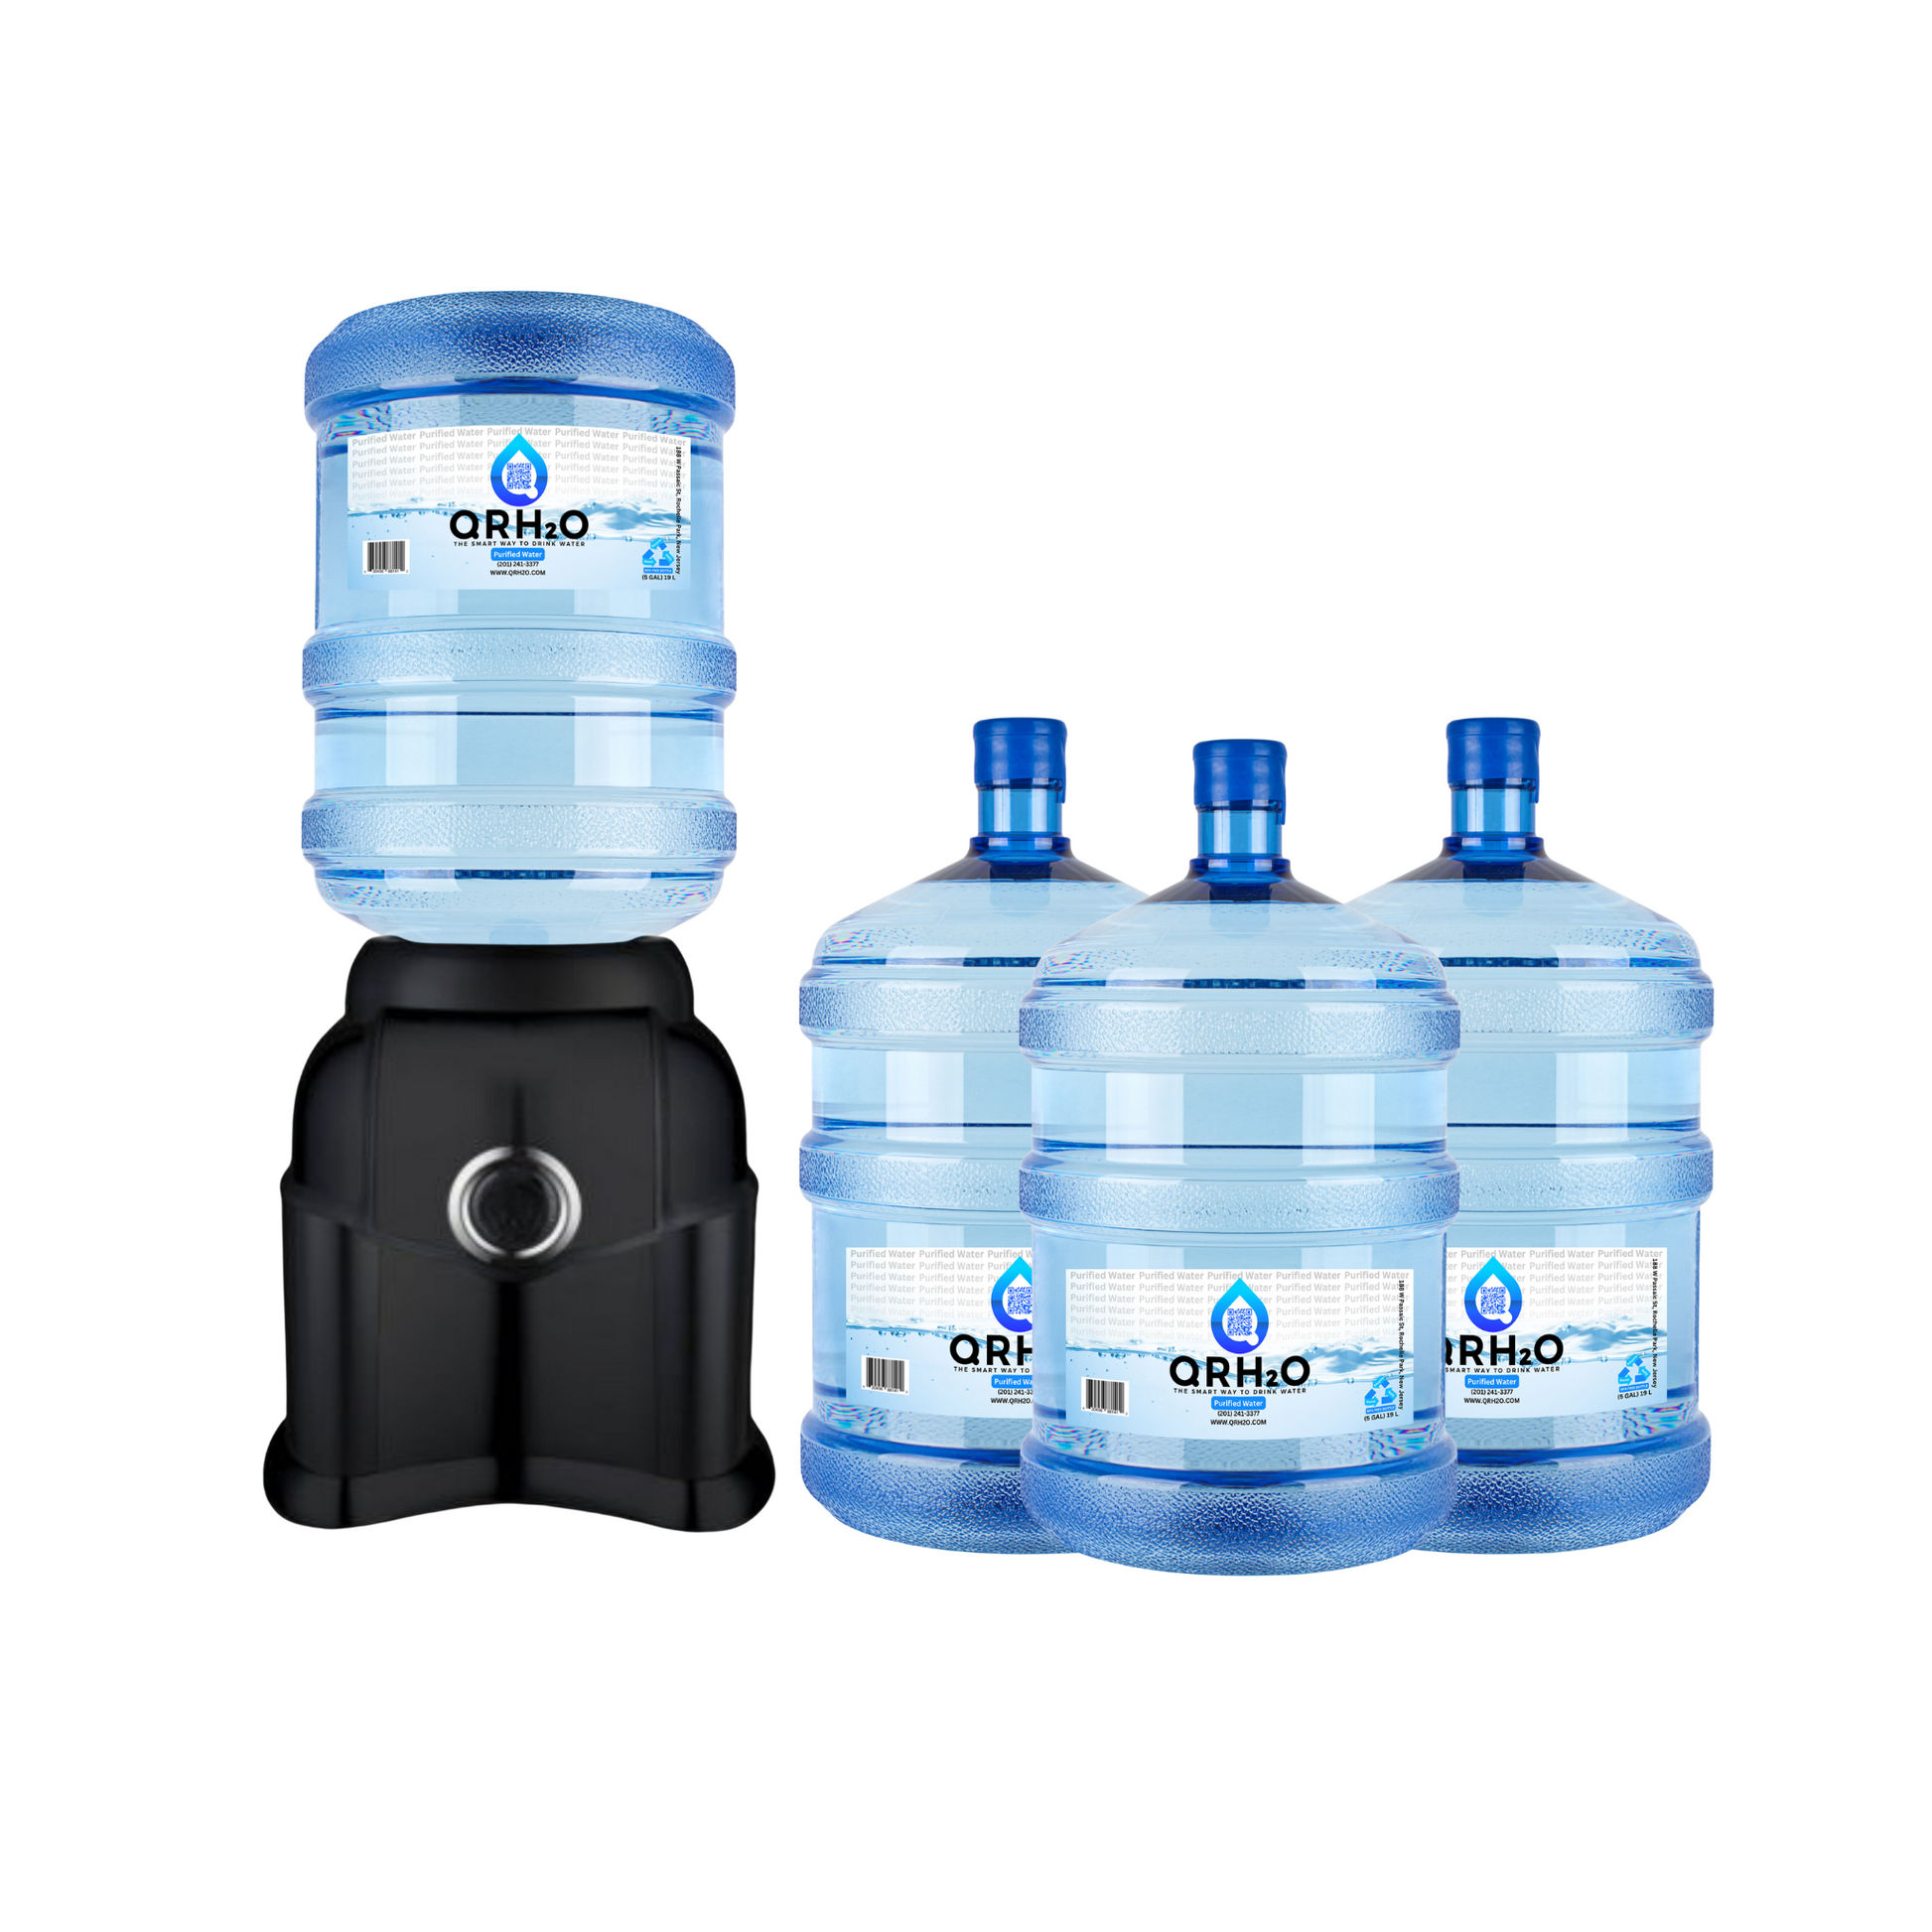 Stay hydrated with our 4-pack of 5-gallon waters and countertop dispenser, offering a choice of alkaline or purified water at room temperature.